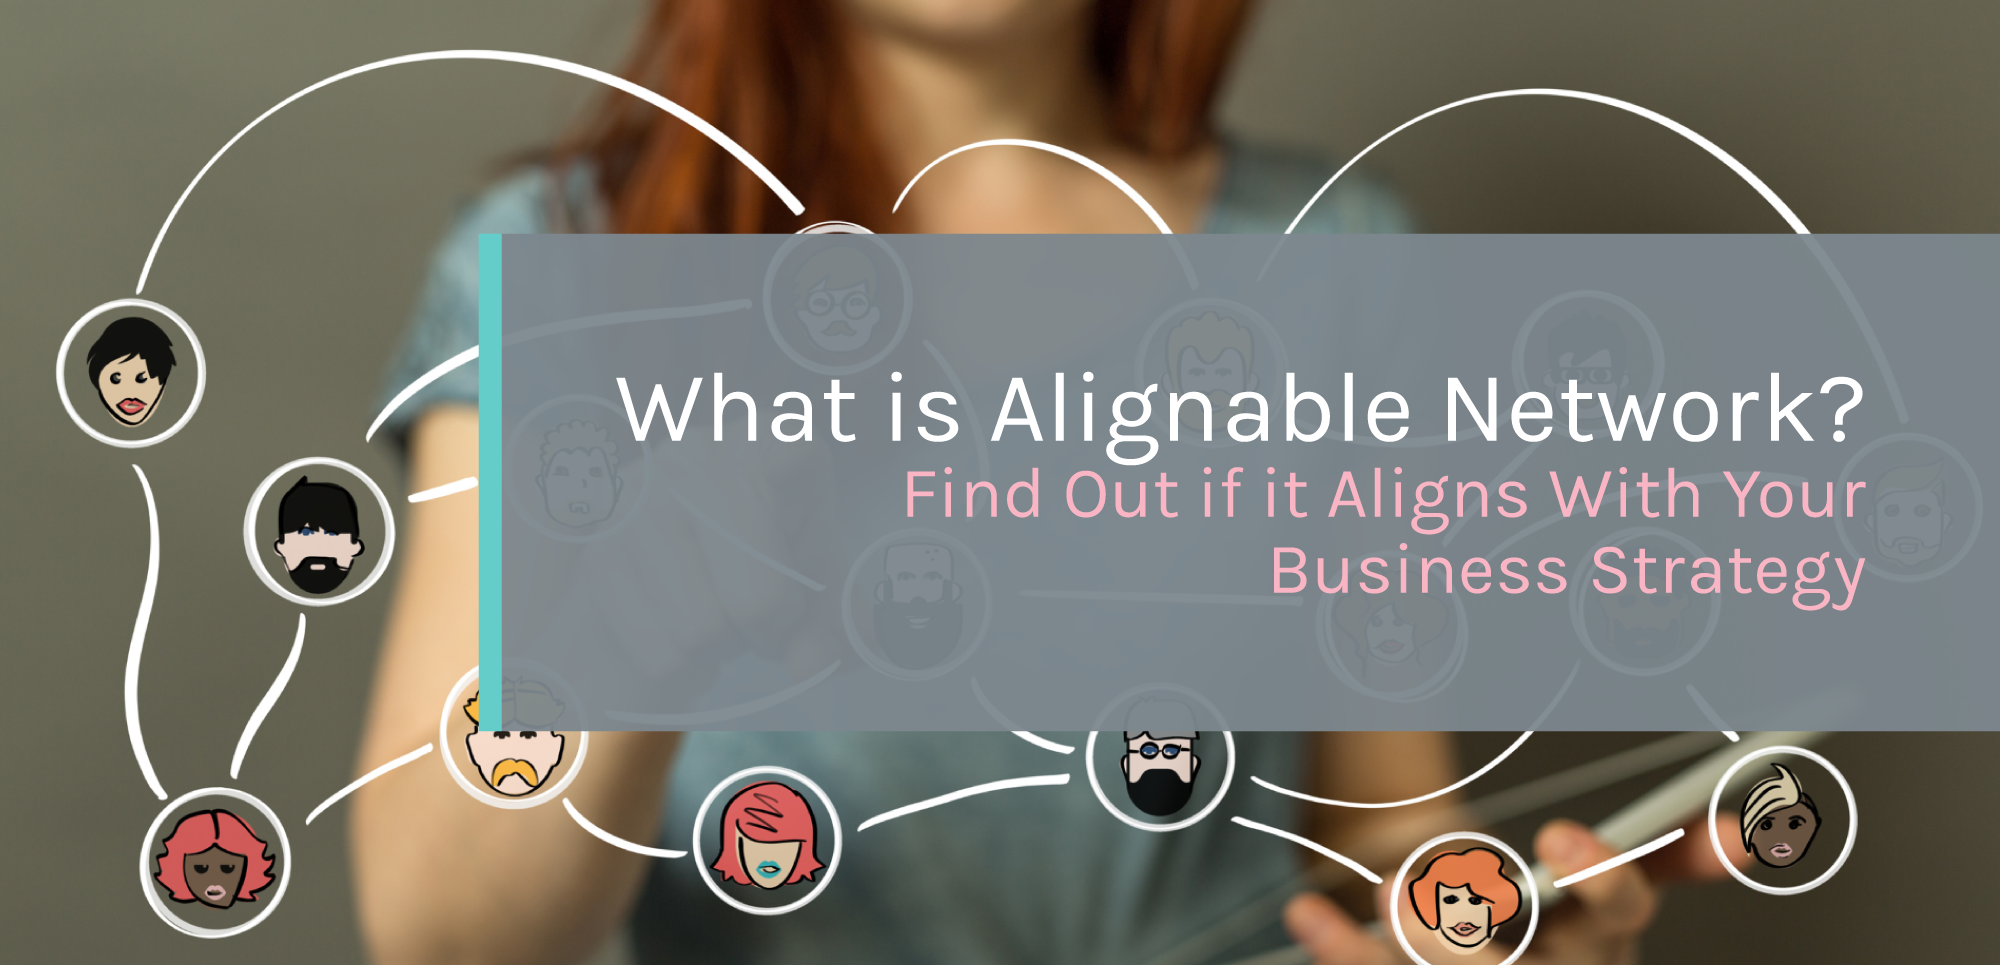 <strong>What is Alignable Network? Find Out if It Aligns With Your Business Strategy</strong>